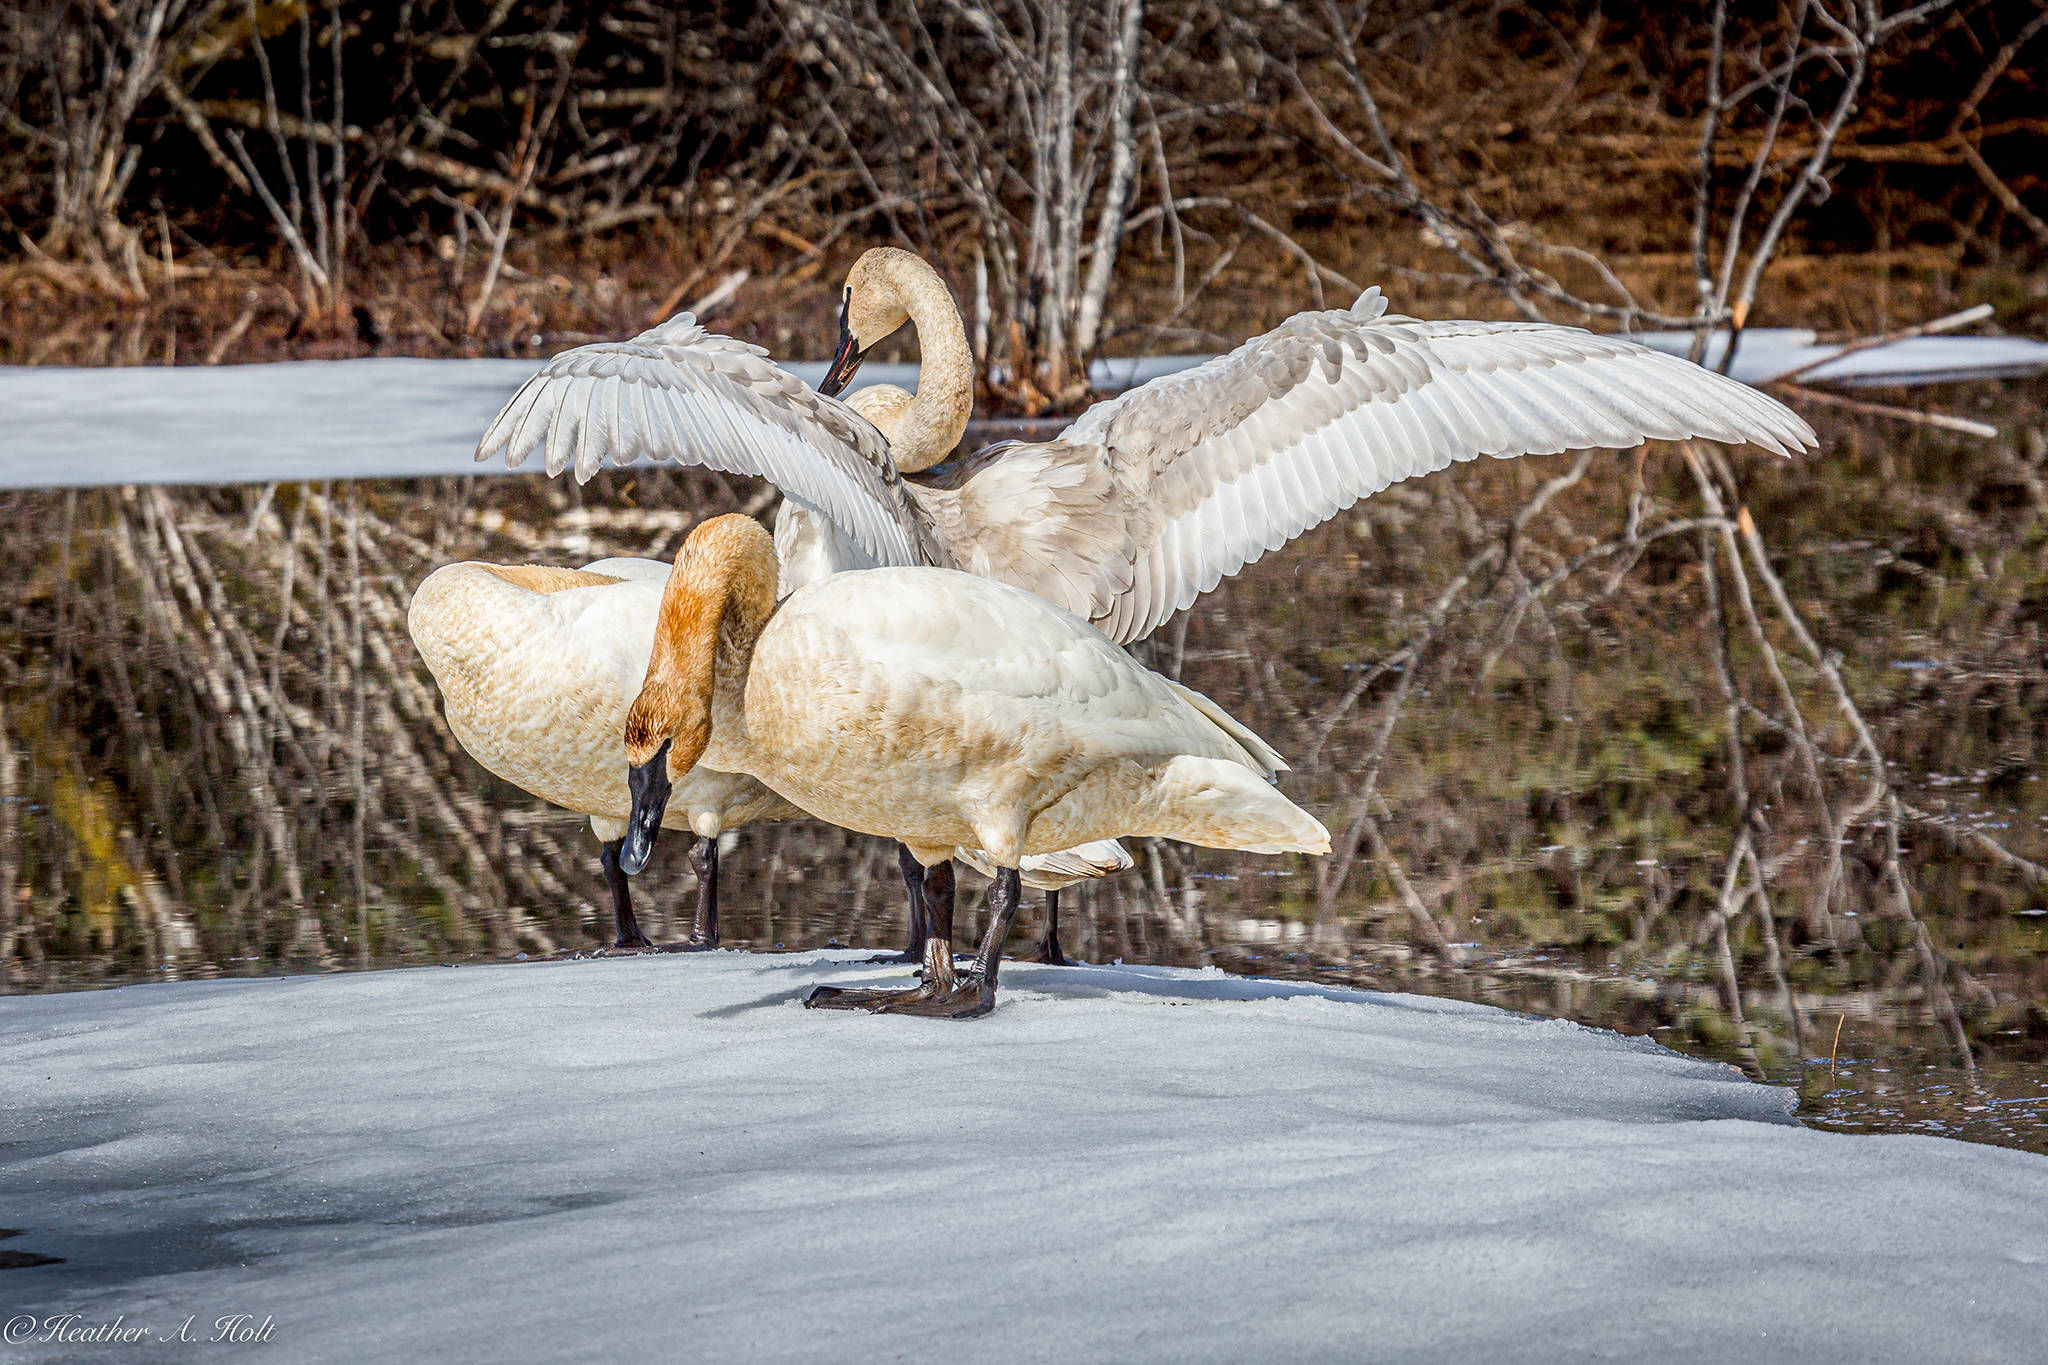 Look for something unique about the environment or weather. These swans landed and were preening on the ice at Dredge Lake. Quite often, when swans get out onto the ice they will flap their wings so be ready. The background is busy in this photo but the uniqueness of the swan and the ice make it work. It was shot with a Canon 5D Mark III, Canon 100-400mm, 1/1250 sec at f10, ISO 200. (Courtesy Photo / Heather Holt)
Look for something unique about the environment or weather. These swans landed and were preening on the ice at Dredge Lake. Quite often, when swans get out onto the ice they will flap their wings so be ready. The background is busy in this photo but the uniqueness of the swan and the ice make it work. It was shot with a Canon 5D Mark III, Canon 100-400mm, 1/1250 sec at f10, ISO 200. (Courtesy Photo / Heather Holt)